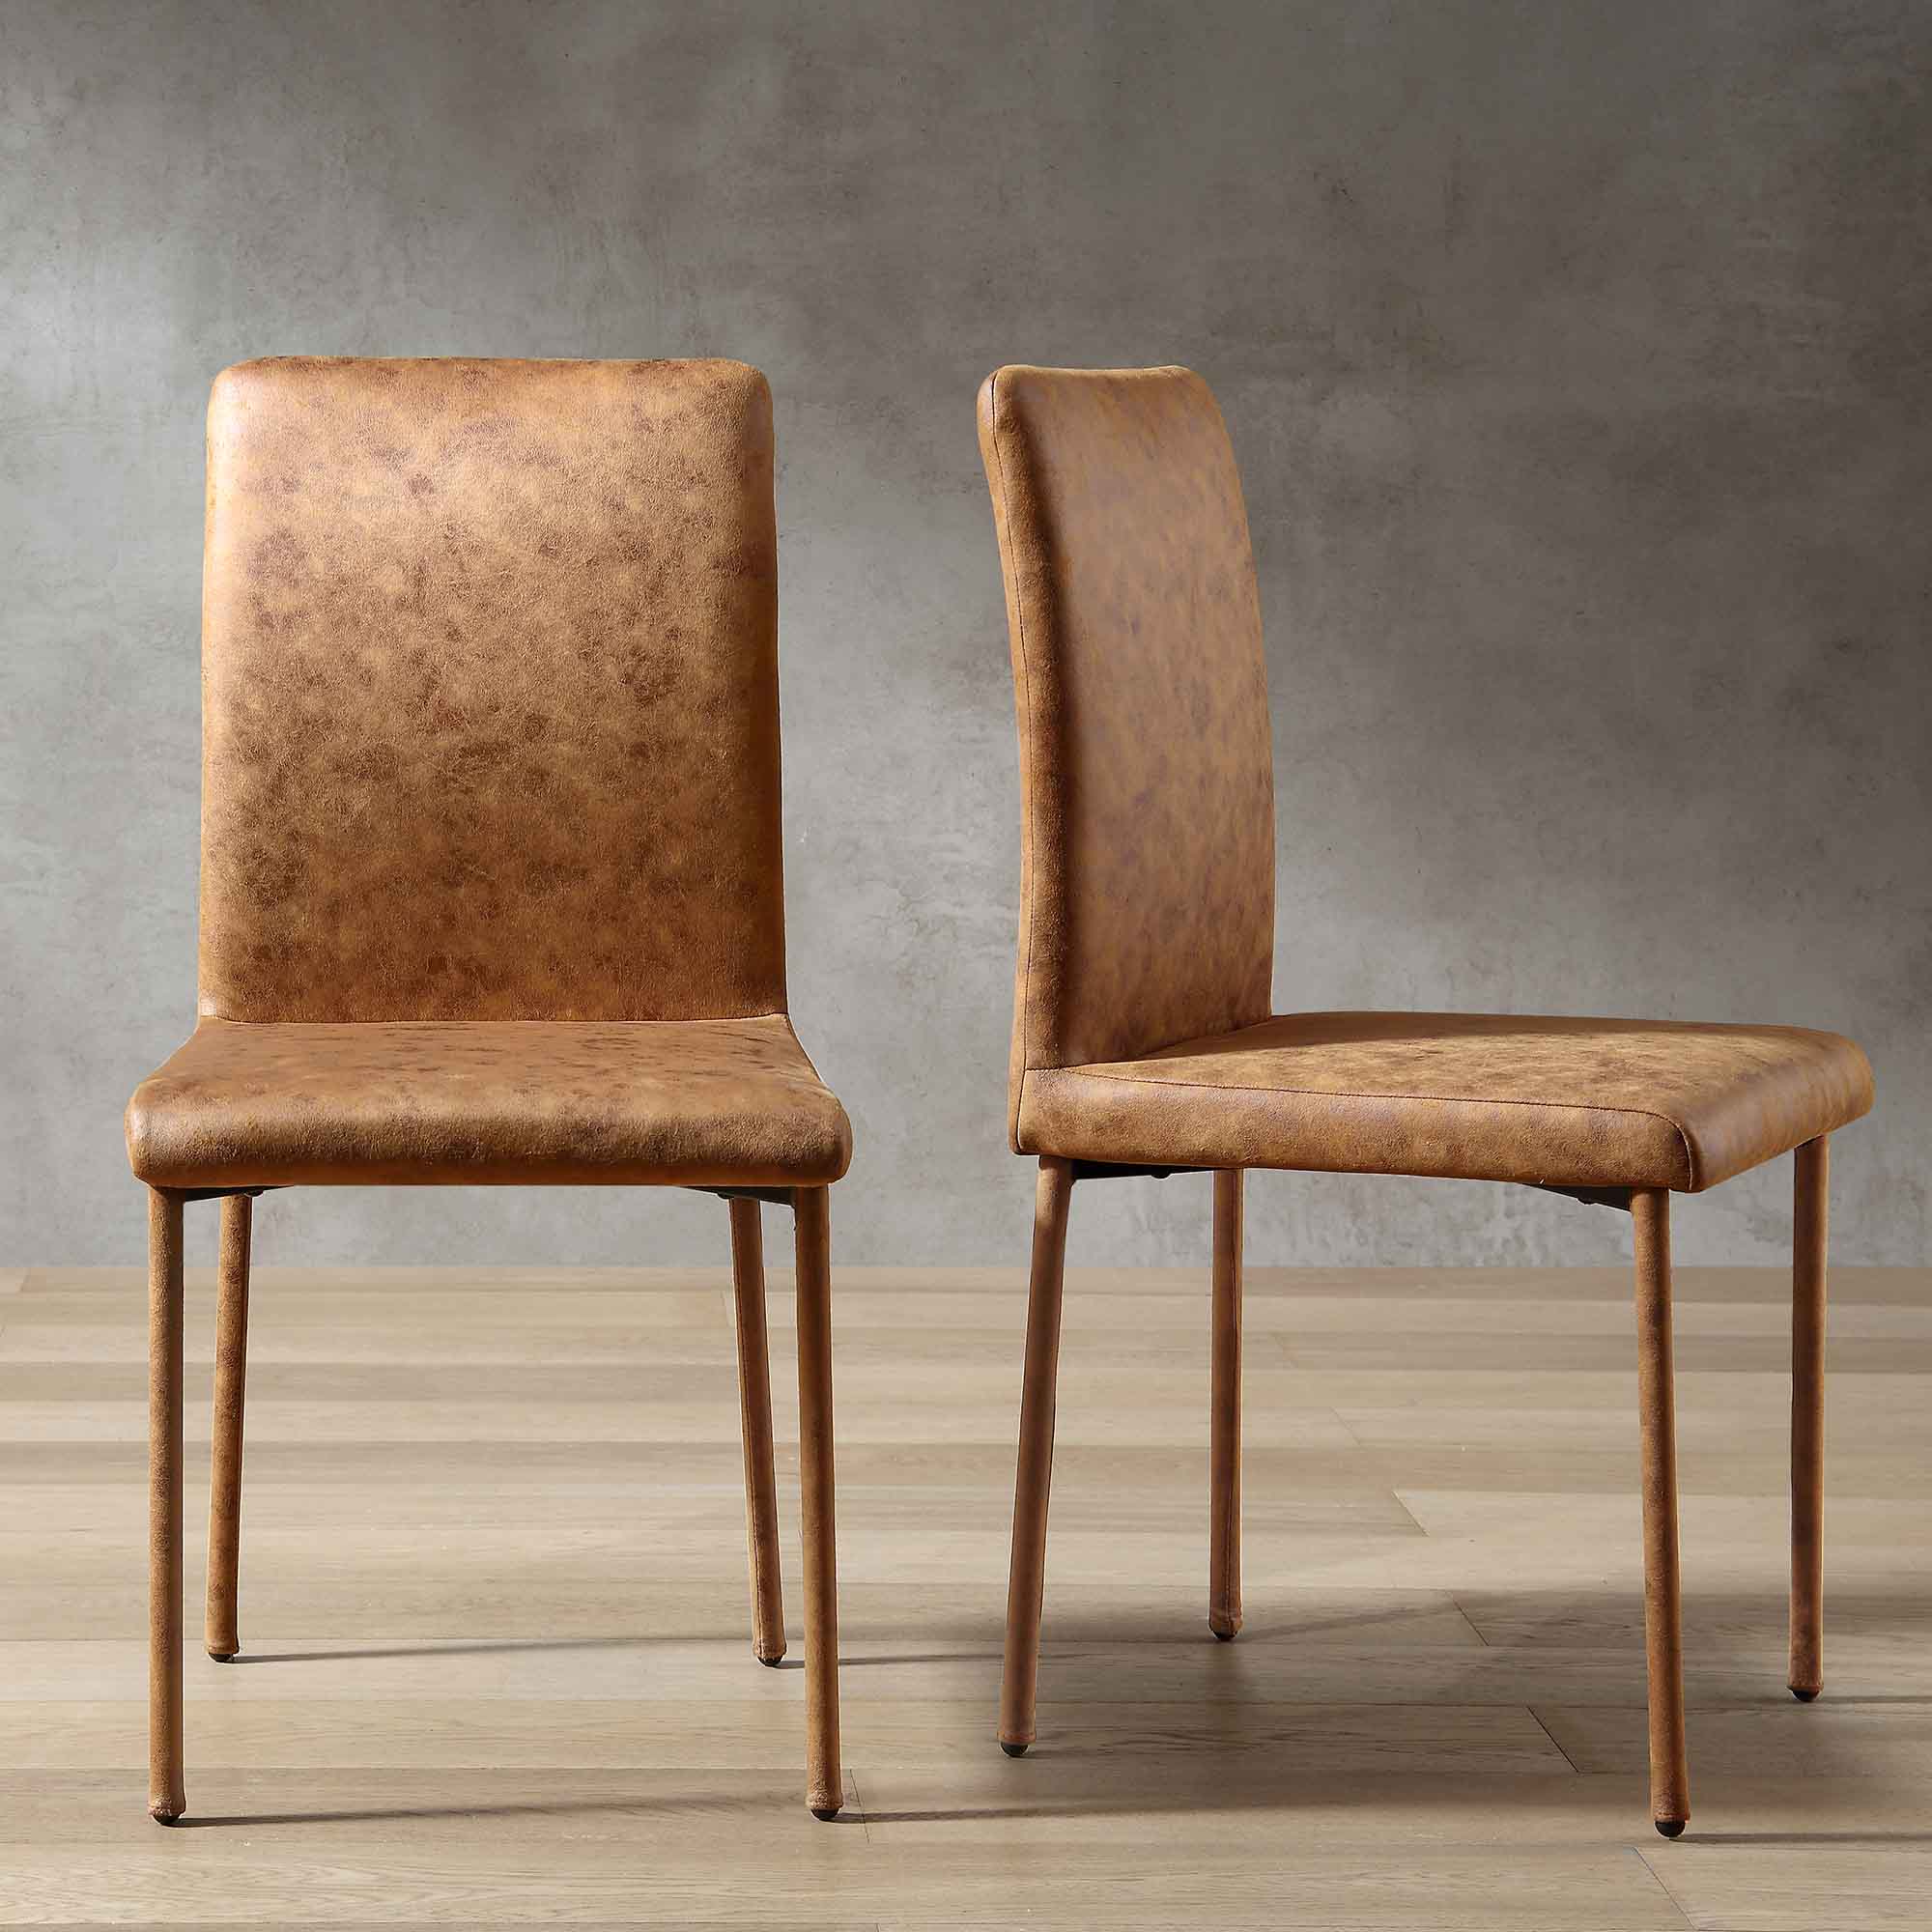 Fernie Set of 2 Cognac Vegan Leather Dining Chairs with Upholstered Legs